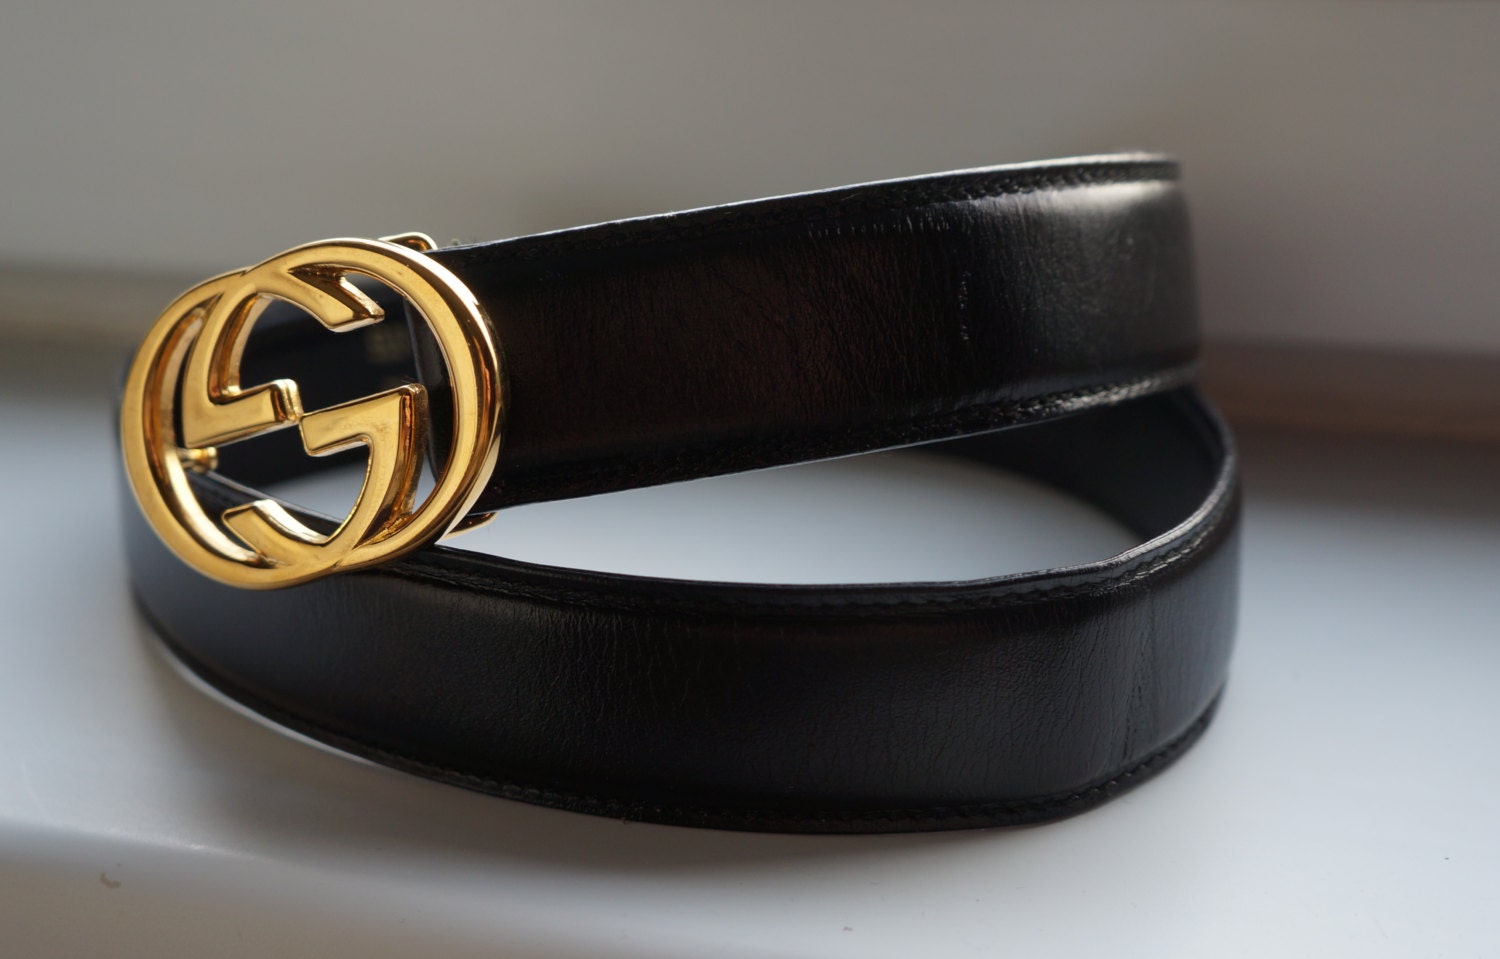 gucci vintage authentic belt black gold gg by StylarniaVintage